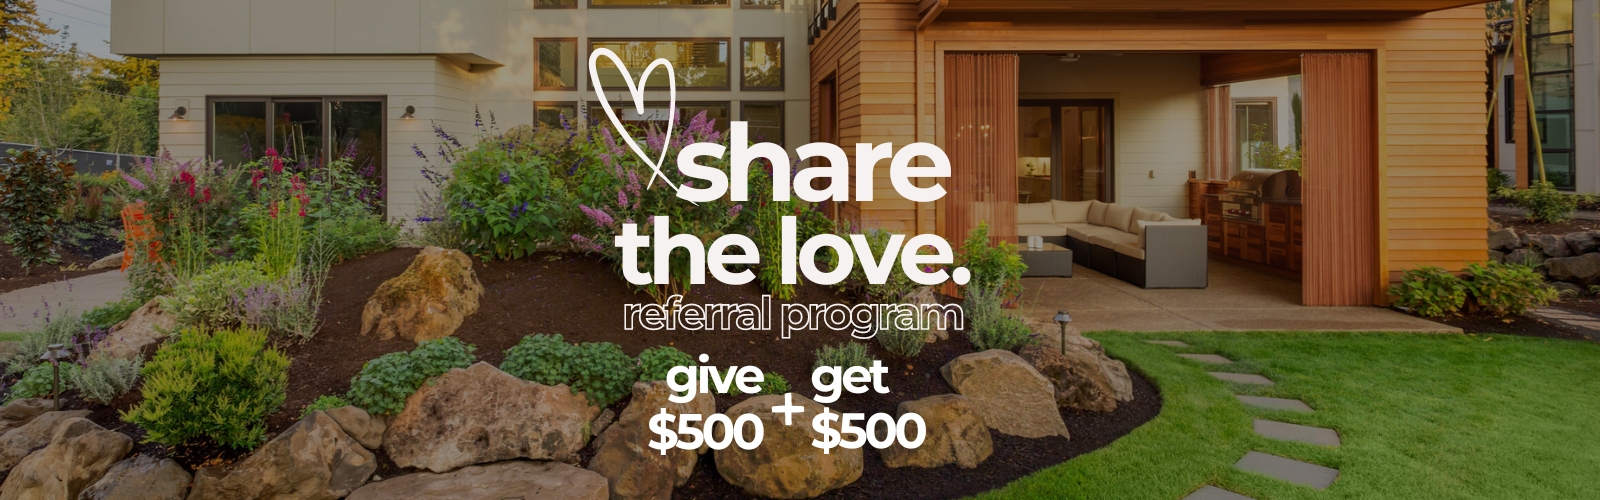 A well-landscaped backyard with lush greenery and a modern patio area. Overlaid text reads, "share the love referral program - give $500, get $500," accompanied by a heart doodle. The scene suggests a promotional offer for the referral program.